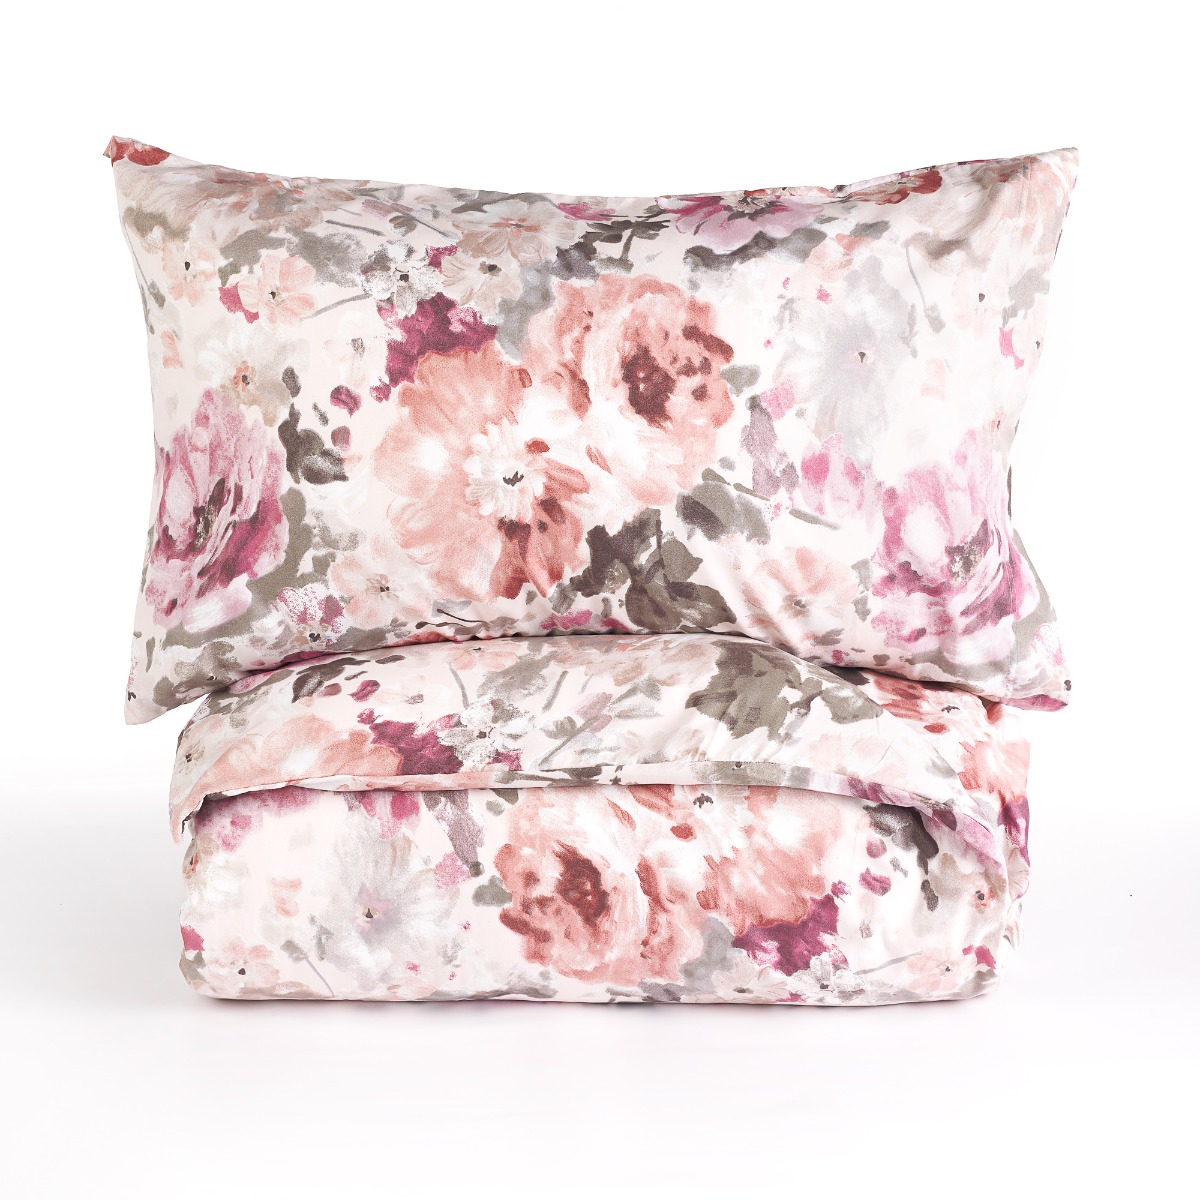 Set copripiumino matrimoniale stampa fiori rosa - Double bed duver cover  set pink flowers printed